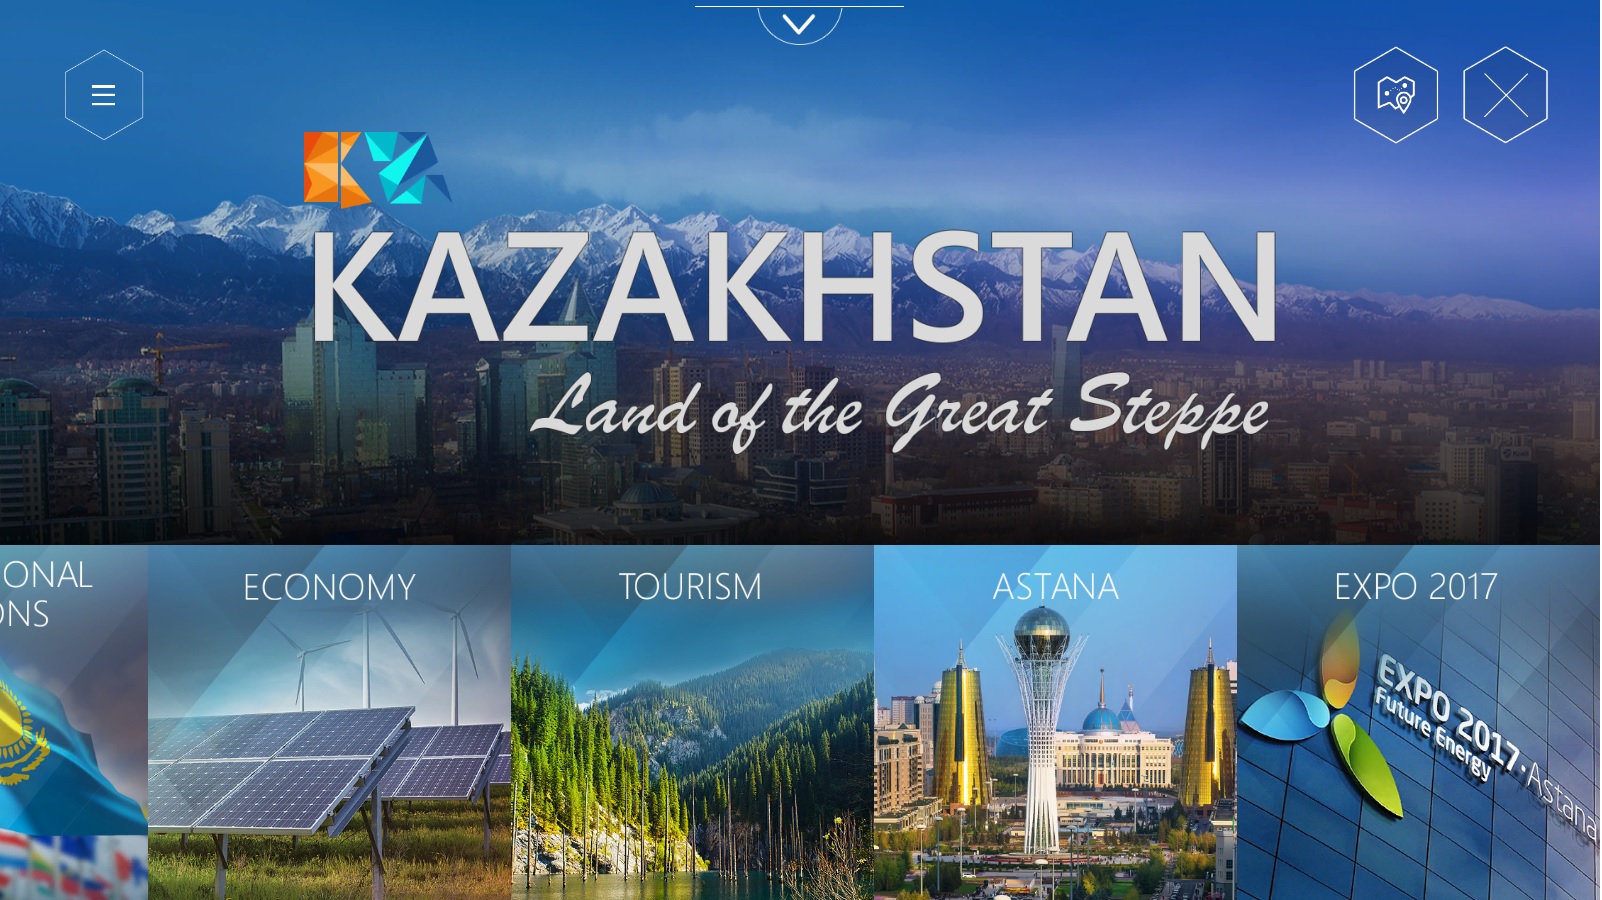 country profile former soviet union republic member kazakhstan 9th largest country in the world